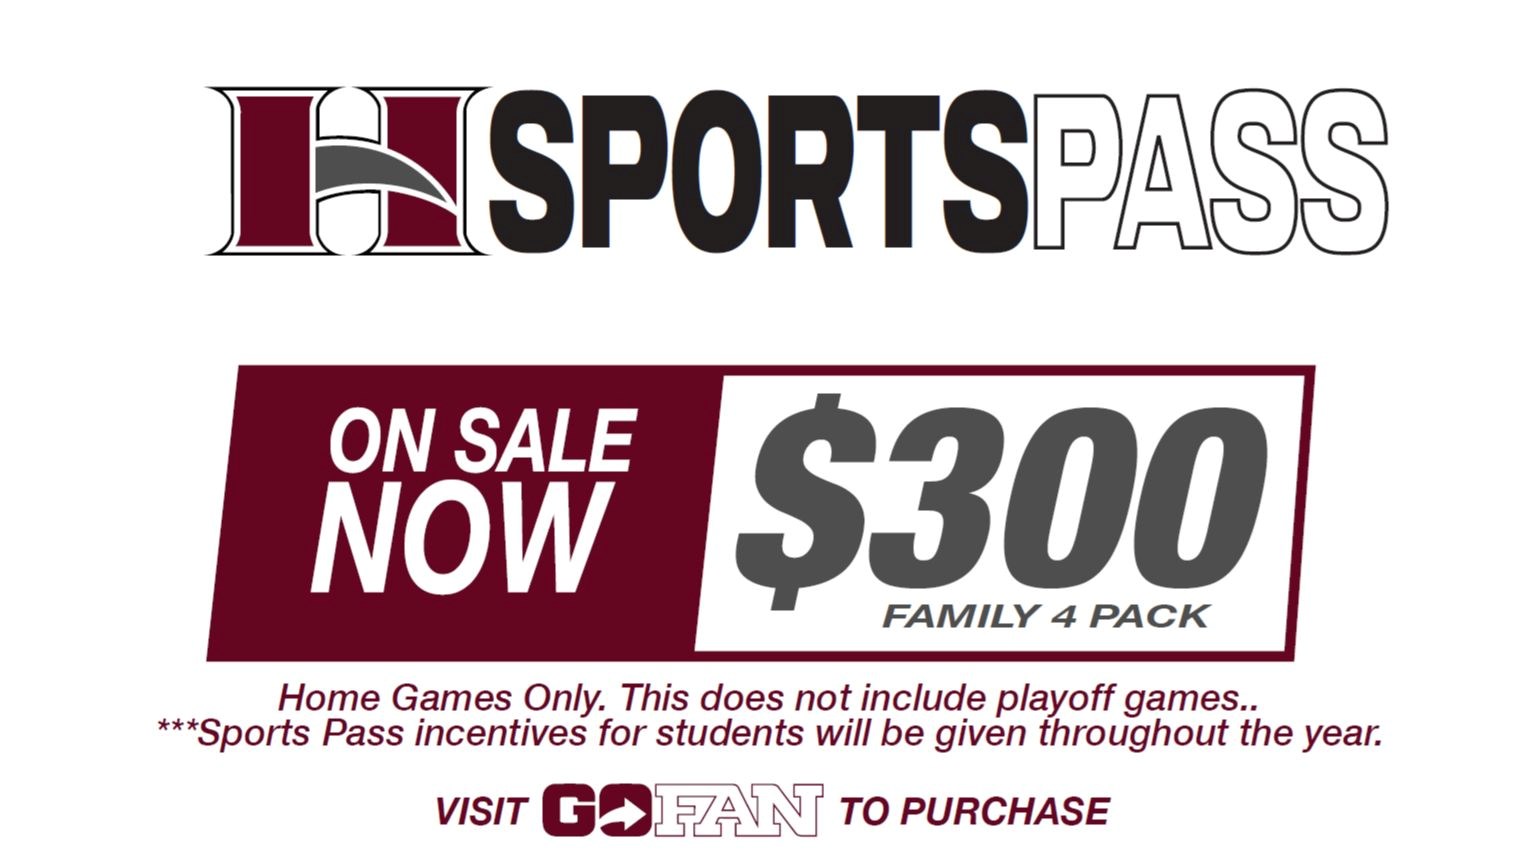 Hillgrove Family Sports Pass On Sale Now!